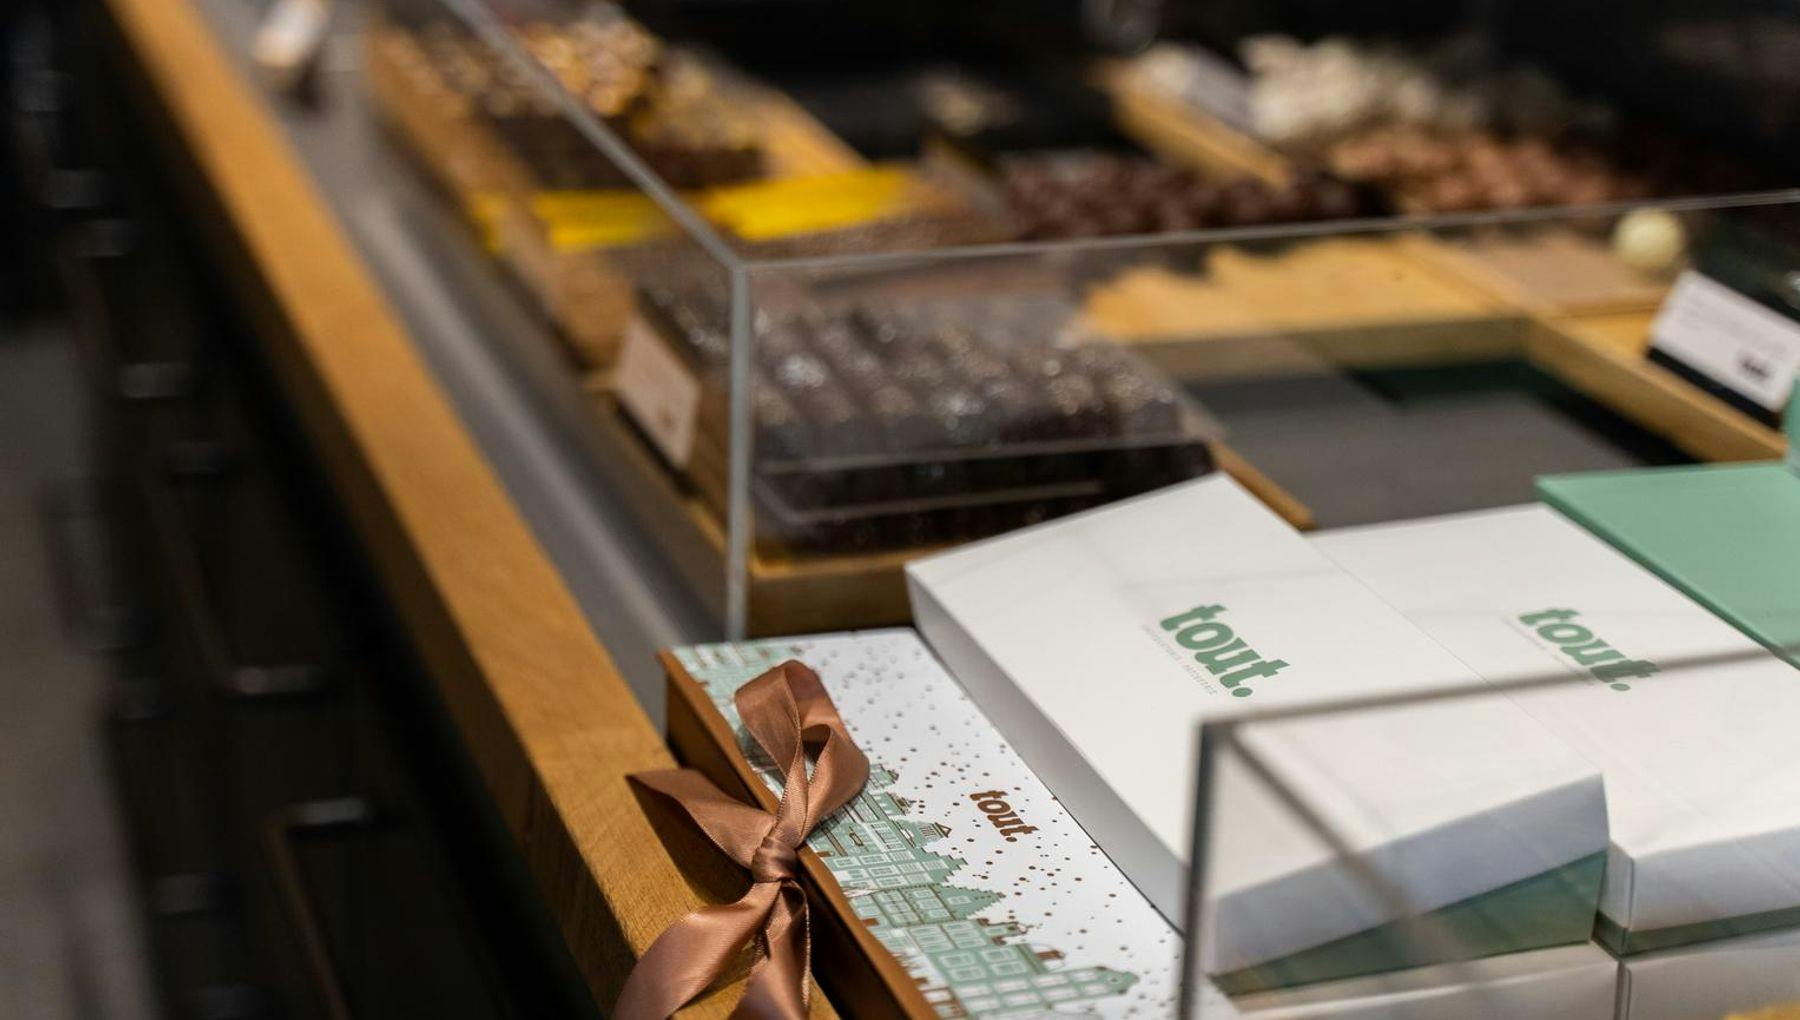 Tout Patisserie, chocolate boxes with image of Amsterdam